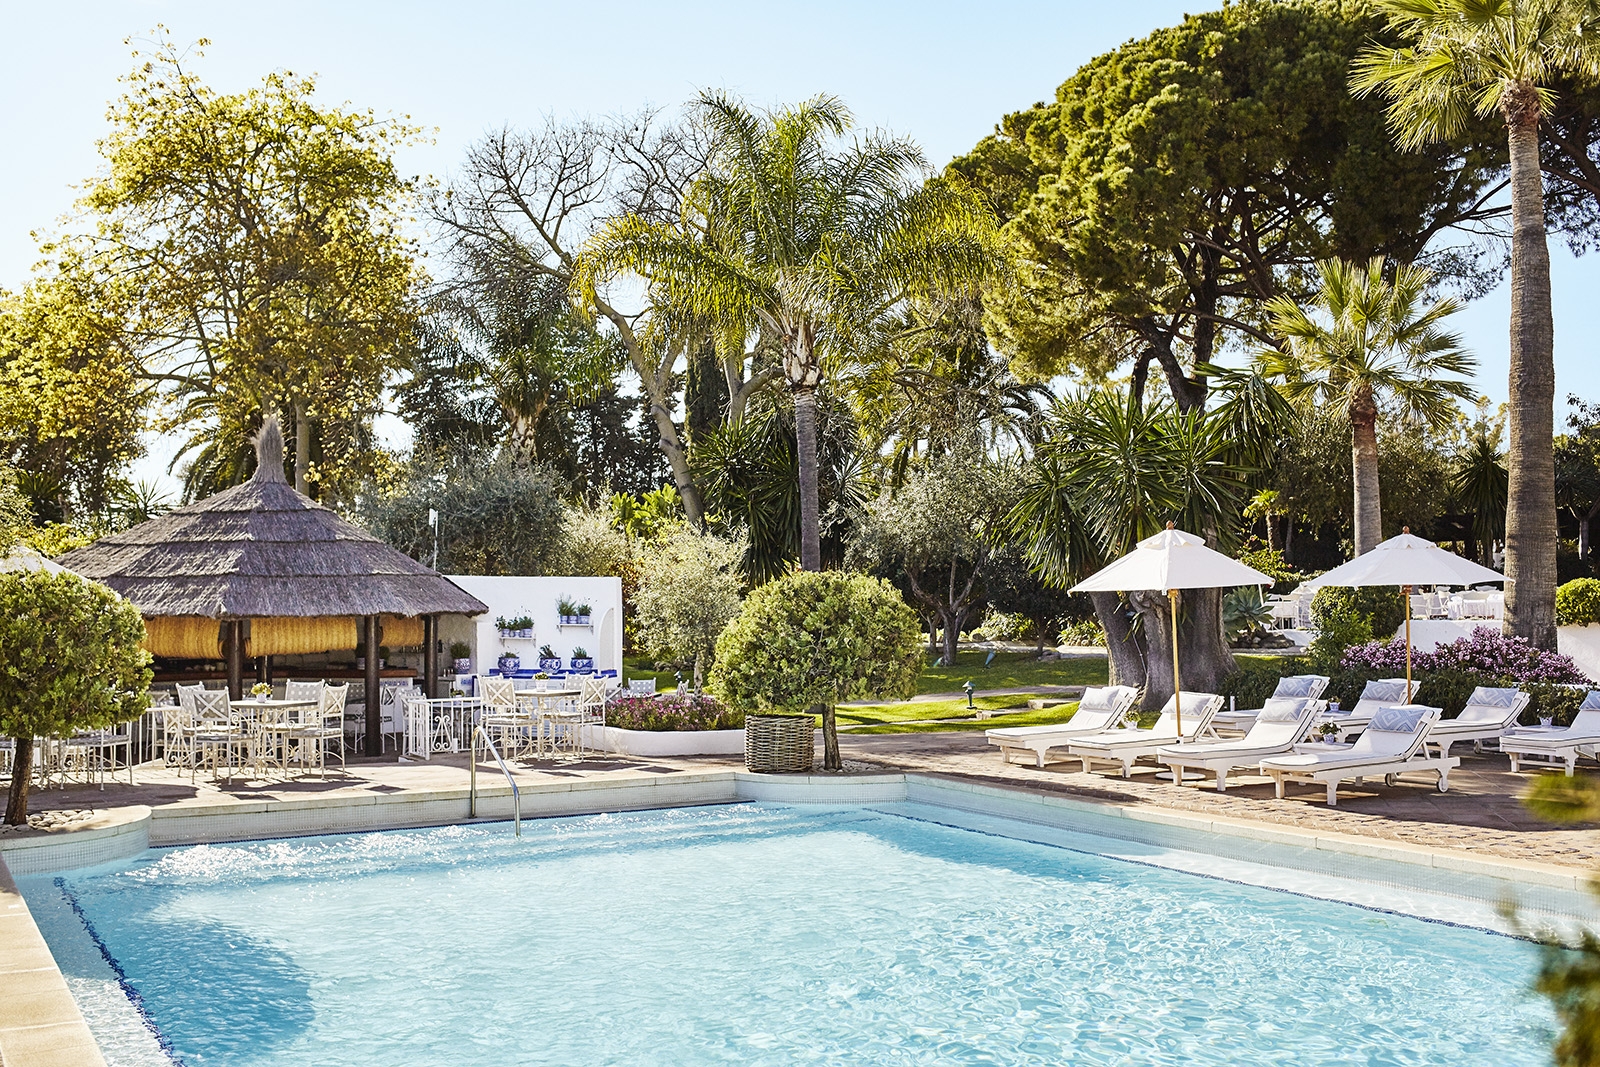 Loungers and parasols at the garden pool of luxury resort Marbella Club in Spain